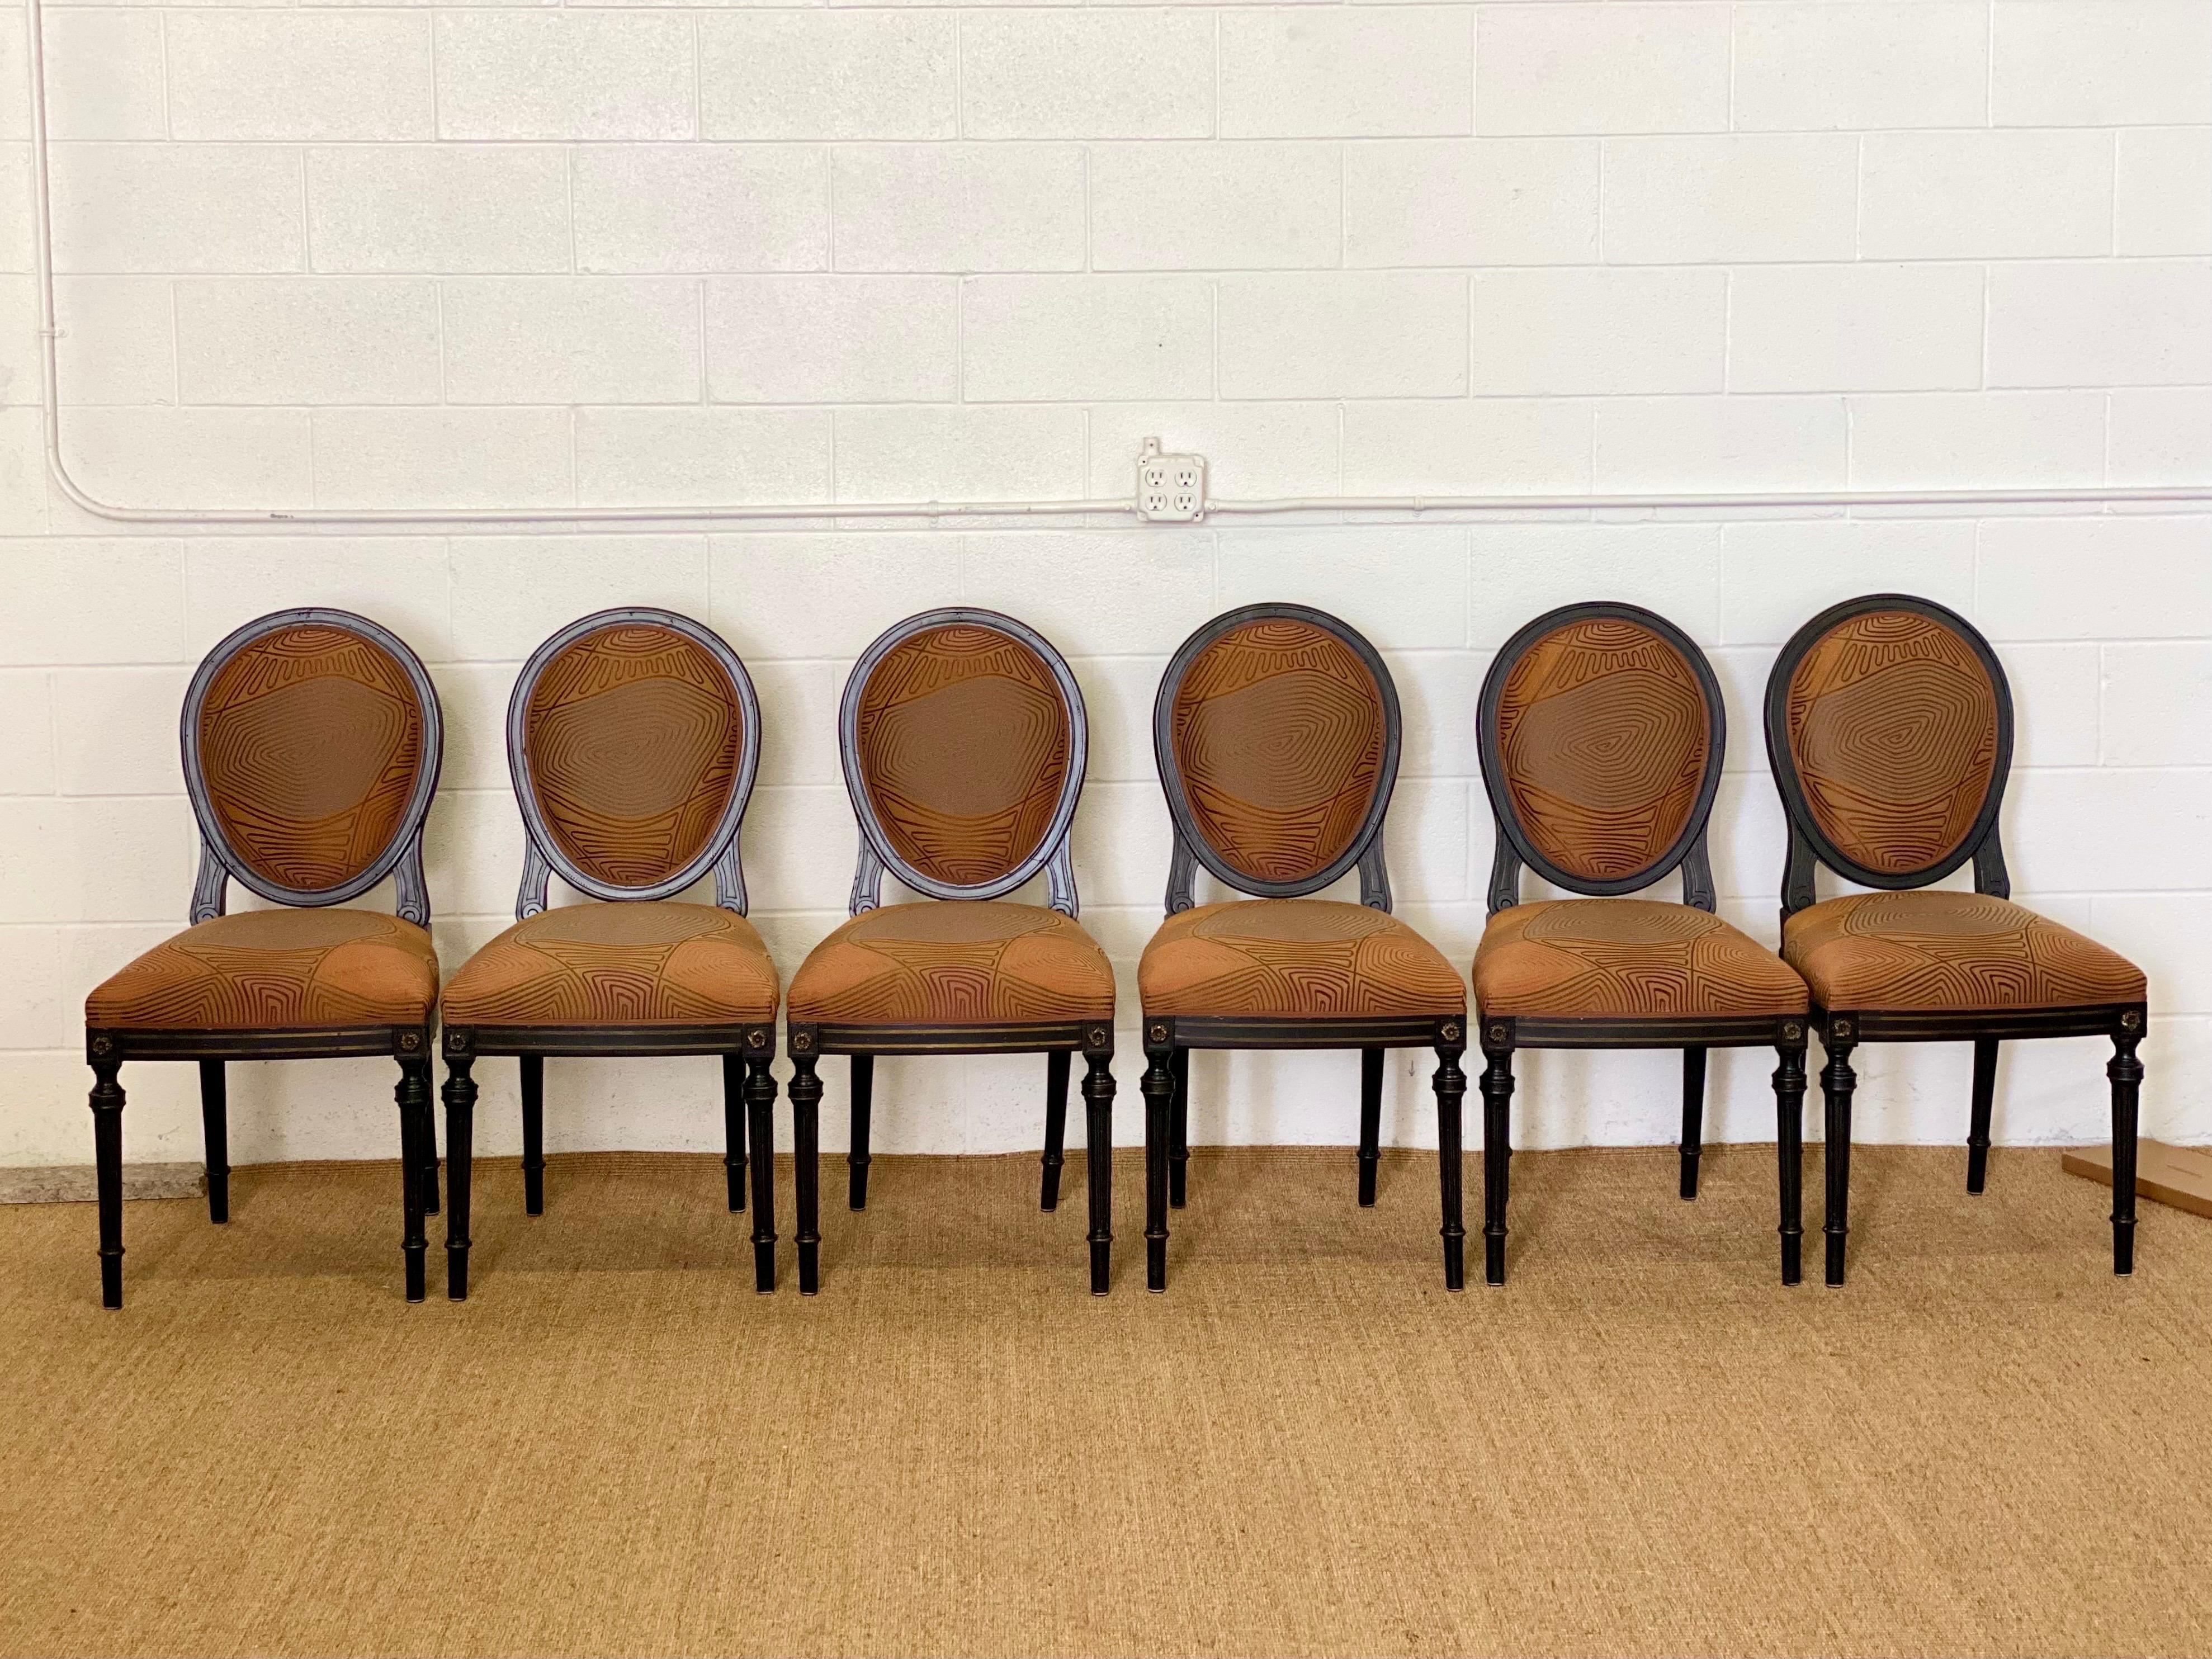 French Early 20th Century Louis XVI Reupholstered Round Back Dining Chairs – Set of 6 For Sale